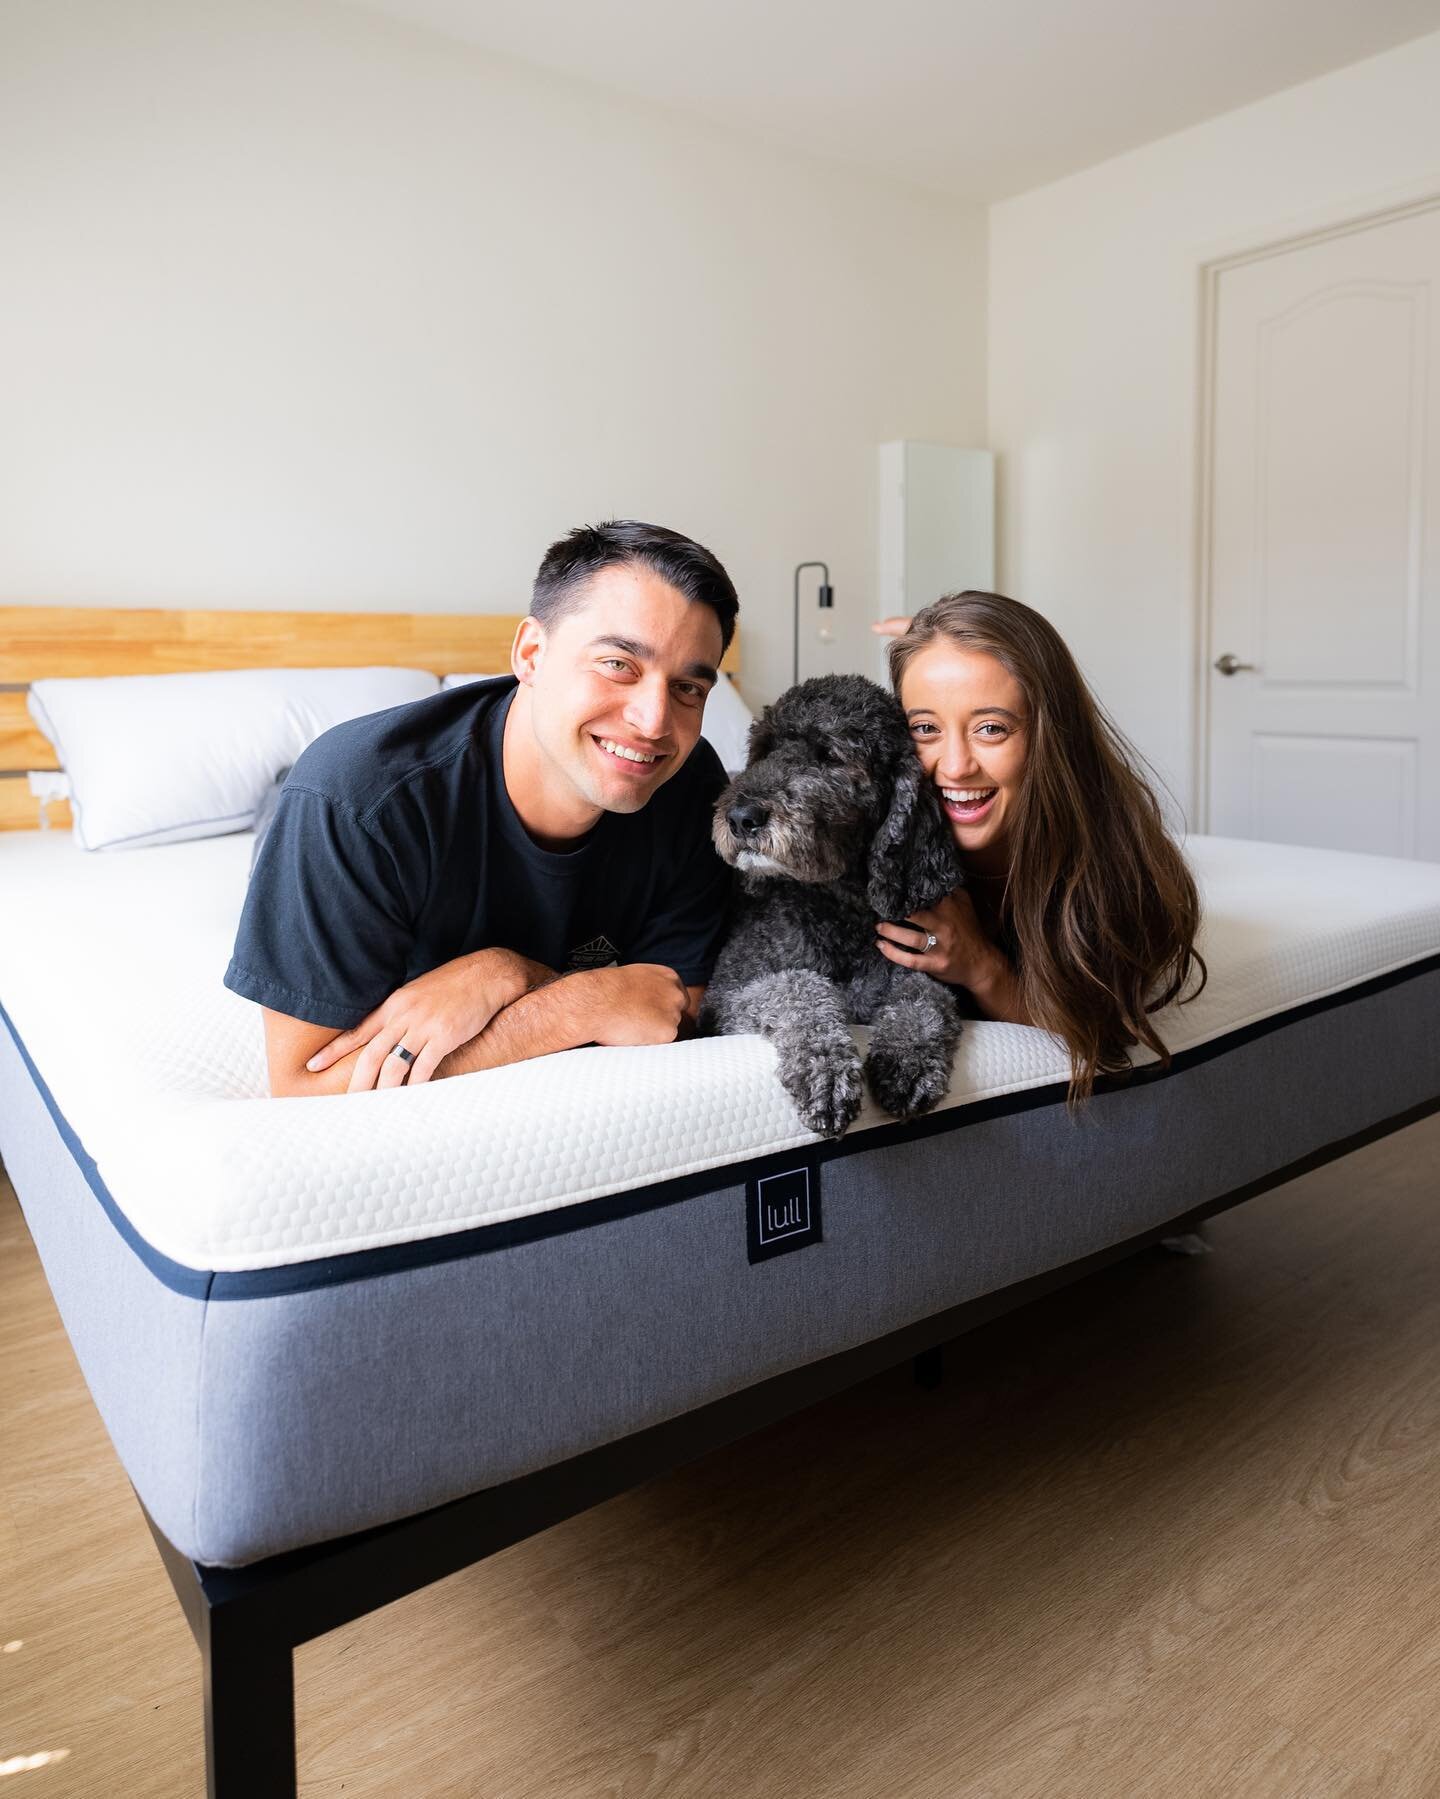 Our new @lullbed mattress is Piko-approved✔️Cody &amp; I approve, too, but who cares what we think, as long as our pup is satisfied😍 Piko loves the cooling gel feature, the hubs &amp; I love the tempur-pedic feature, the whole fam is happy!🤍✨ 

To 